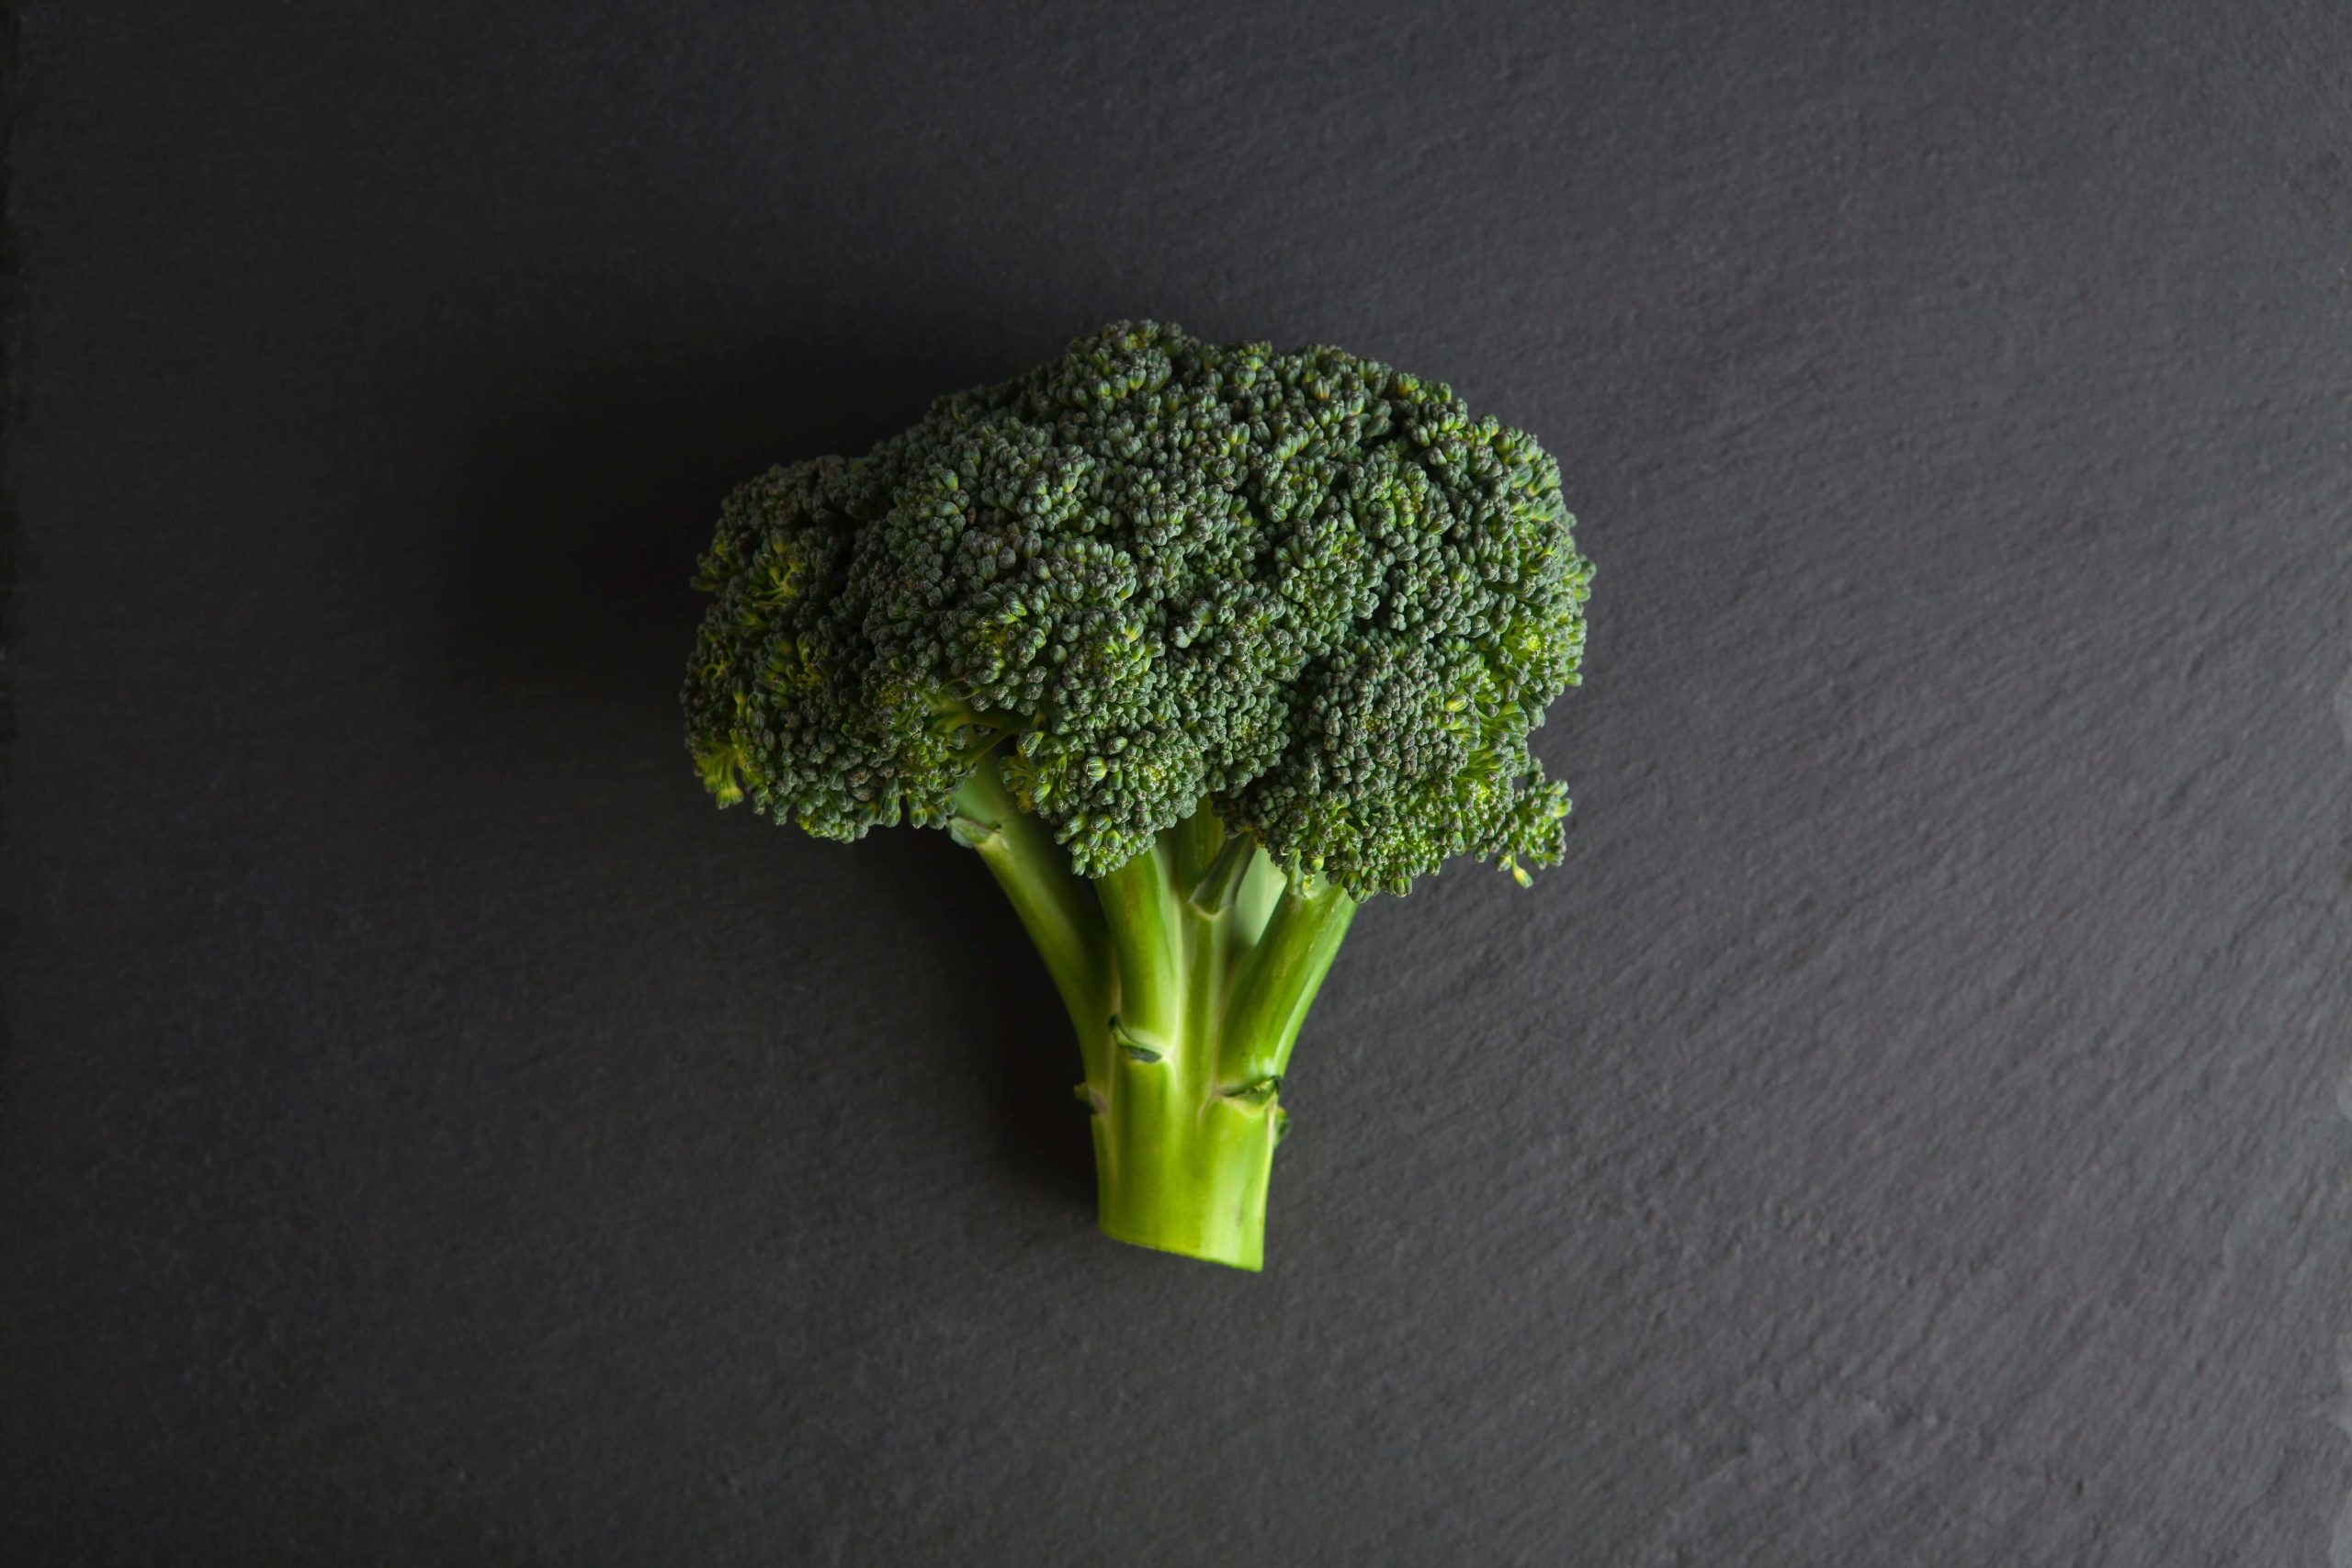 What Happens If You Eat Bad Broccoli?